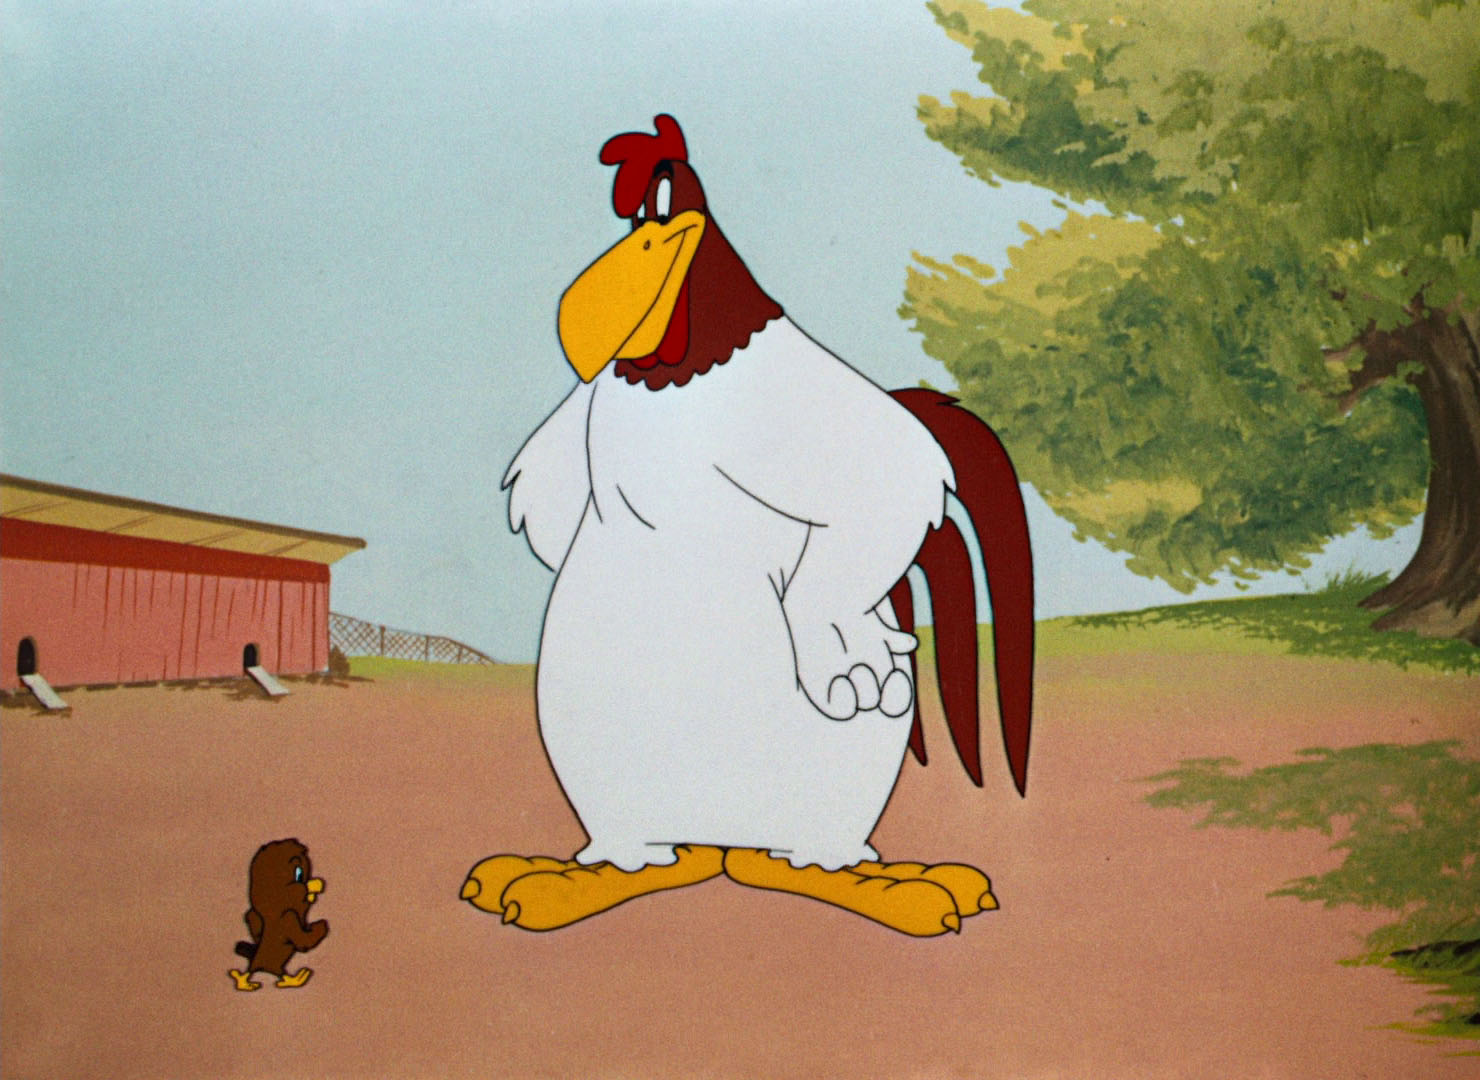 Looney Tunes Pictures: "The Foghorn Leghorn" .